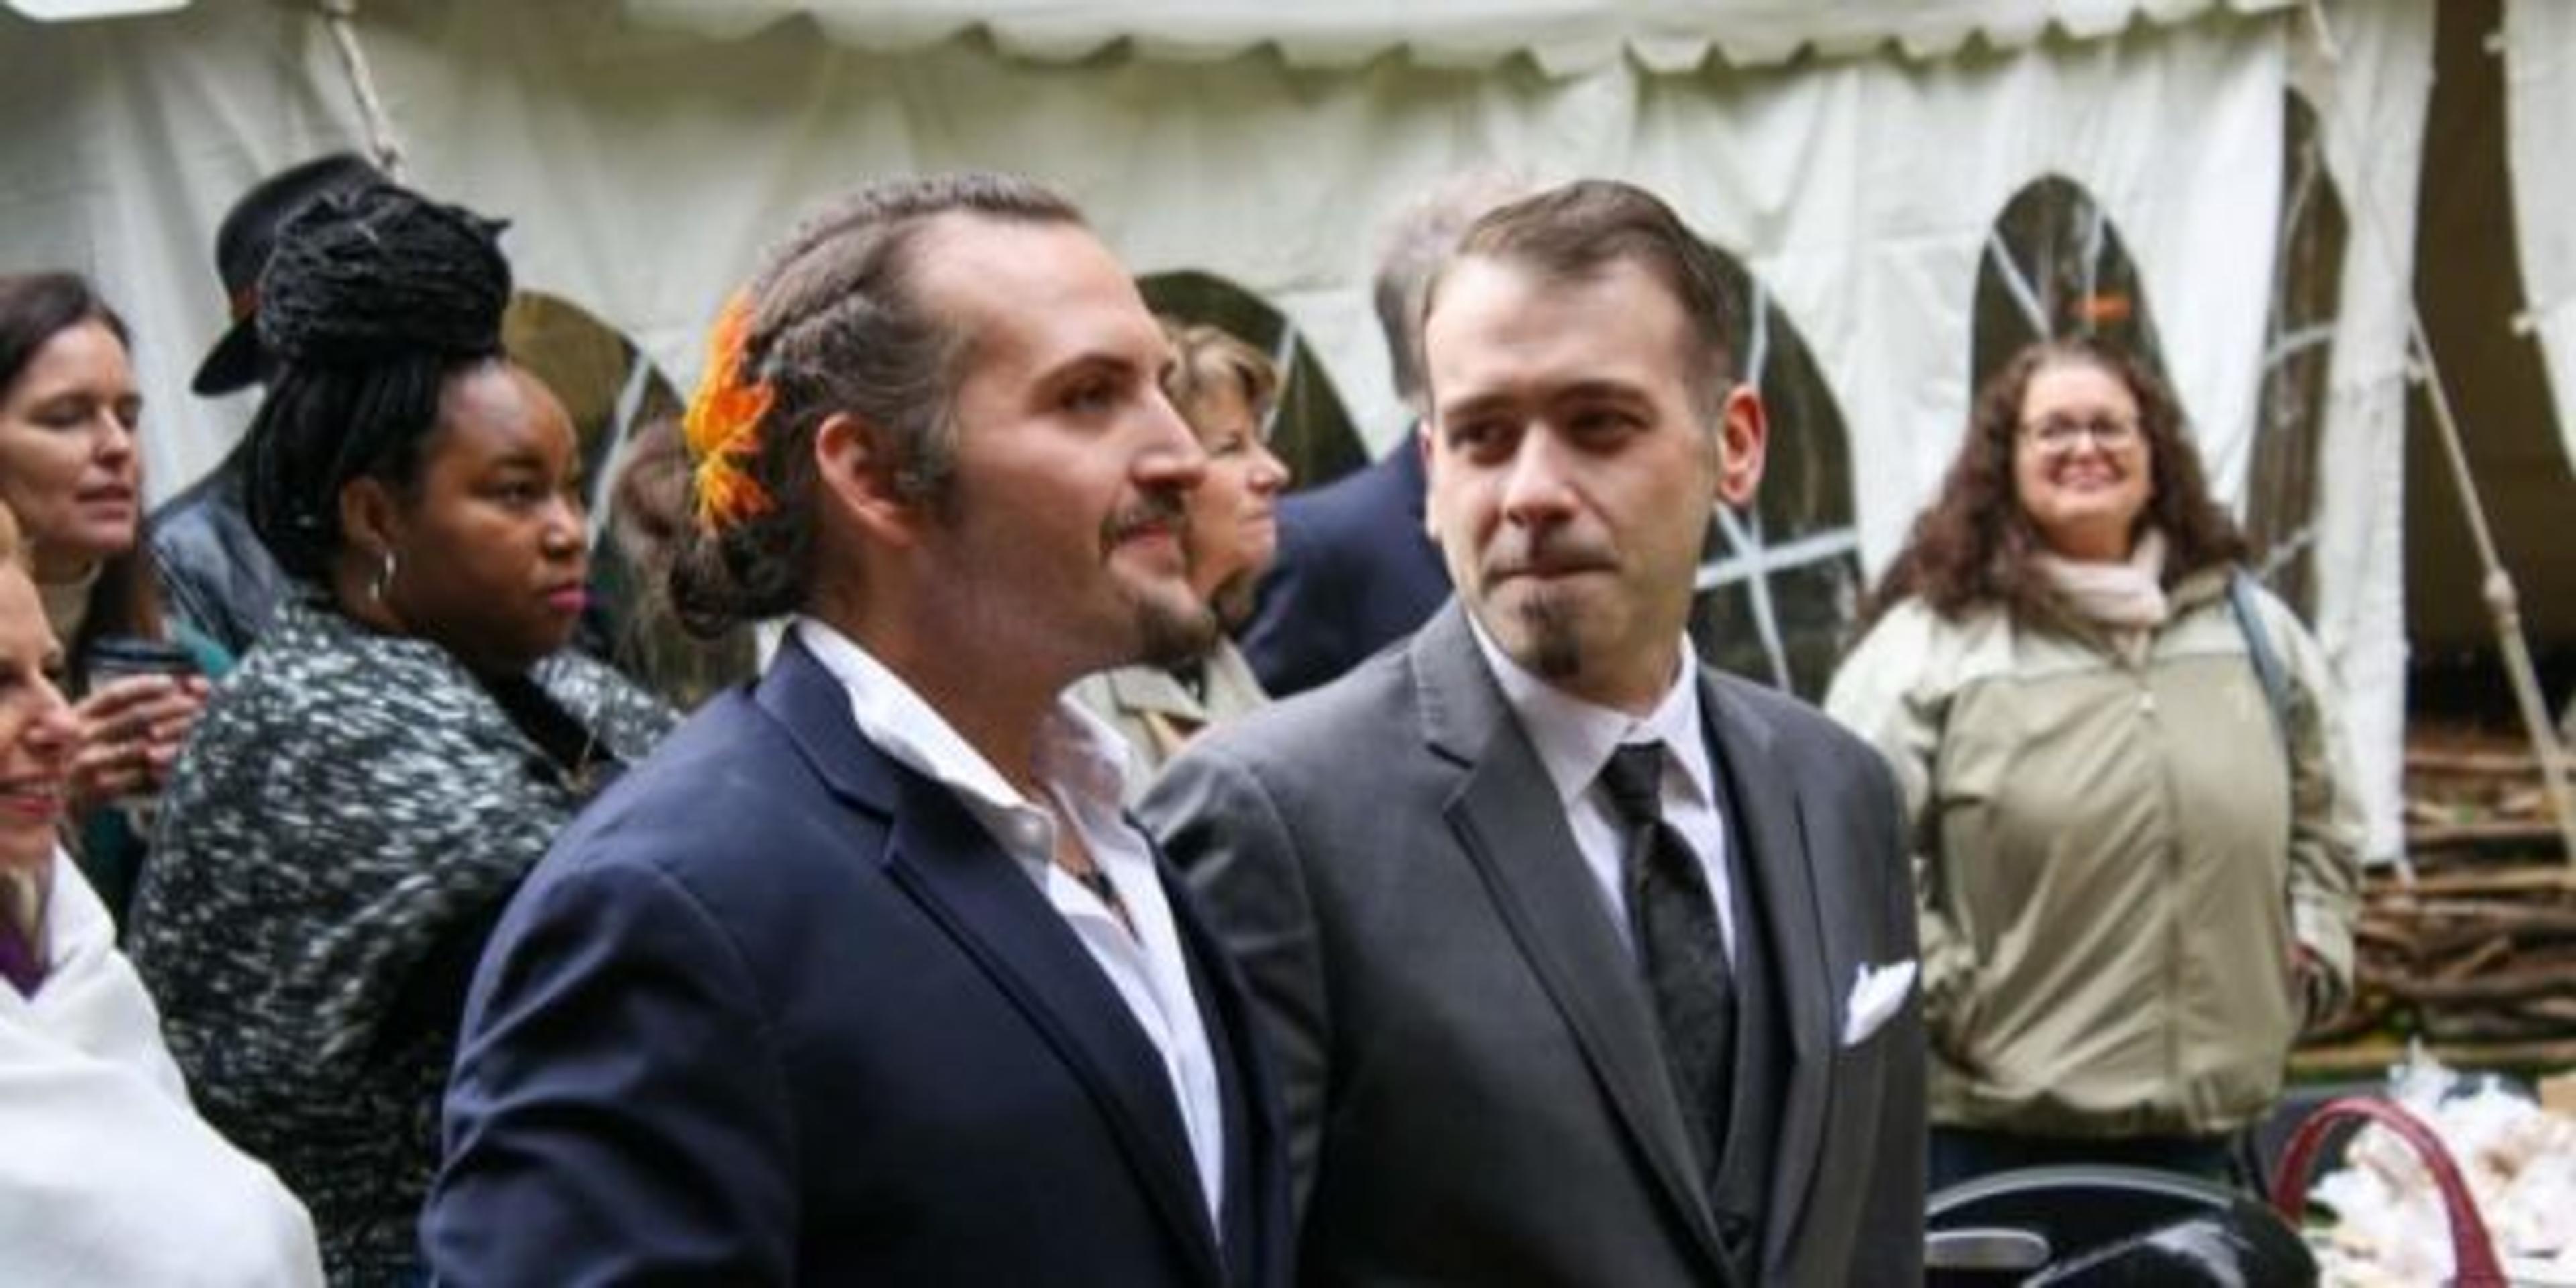 Two men stare at each other lovingly during their wedding ceremony